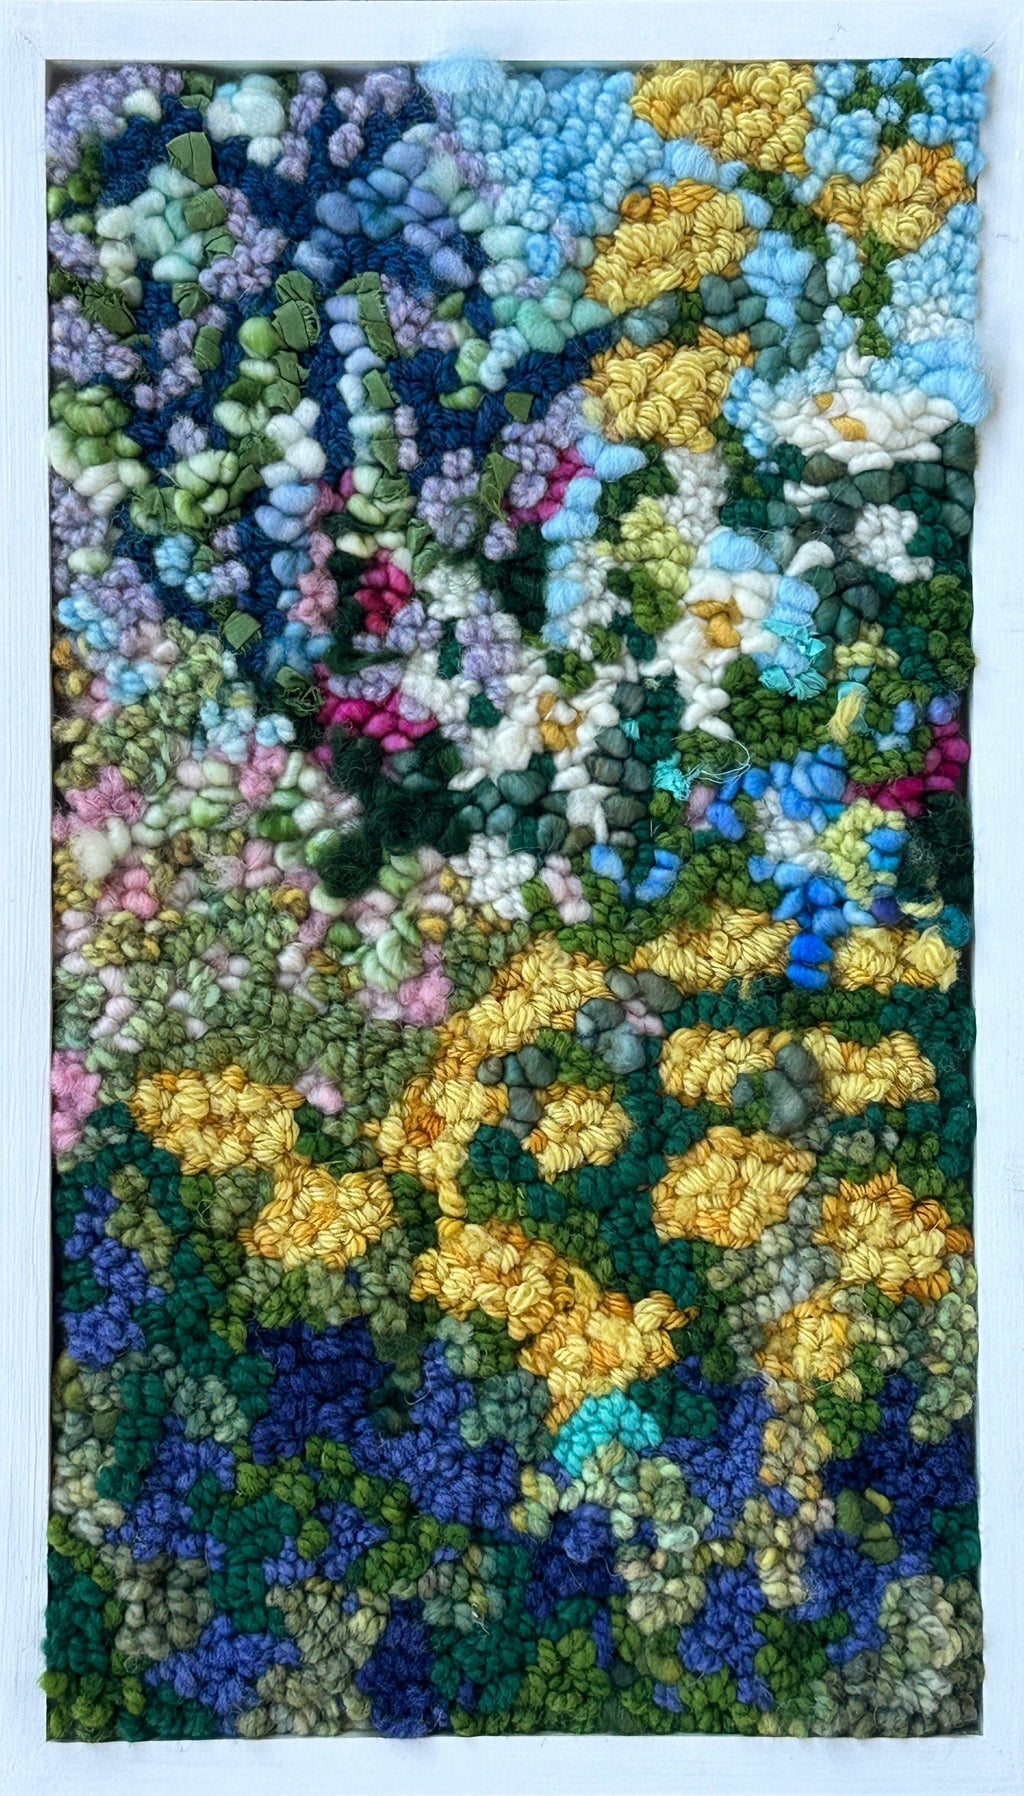 update alt-text with template Wild Yellow Garden, 8.5" x 14.5" Framed-Rugs for sale-Deanne Fitzpatrick Rug Hooking Studio-Rug Hooking Kit -Rug Hooking Pattern -Rug Hooking -Deanne Fitzpatrick Rug Hooking Studio -Is rug hooking the same as punch needle?